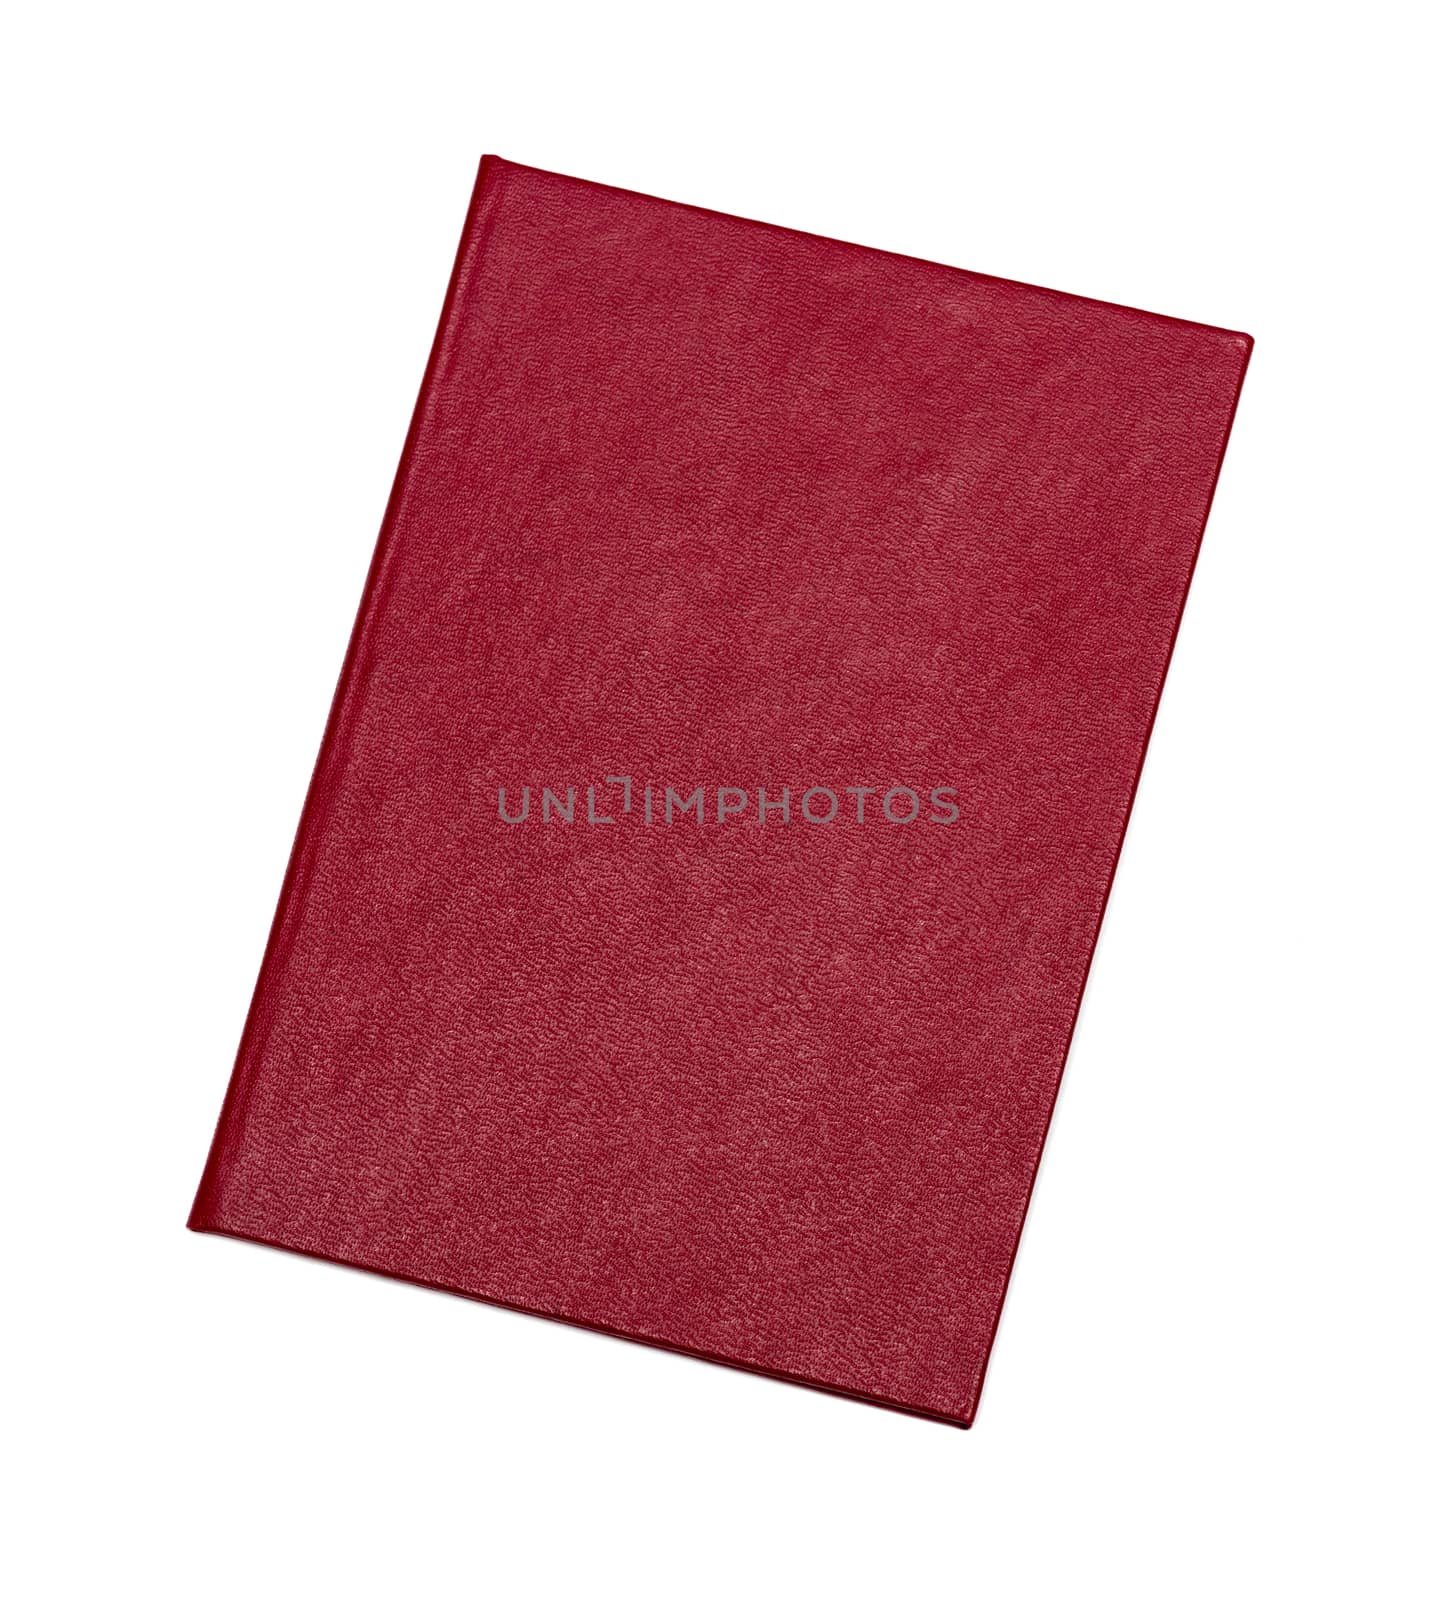 red cover on a white background